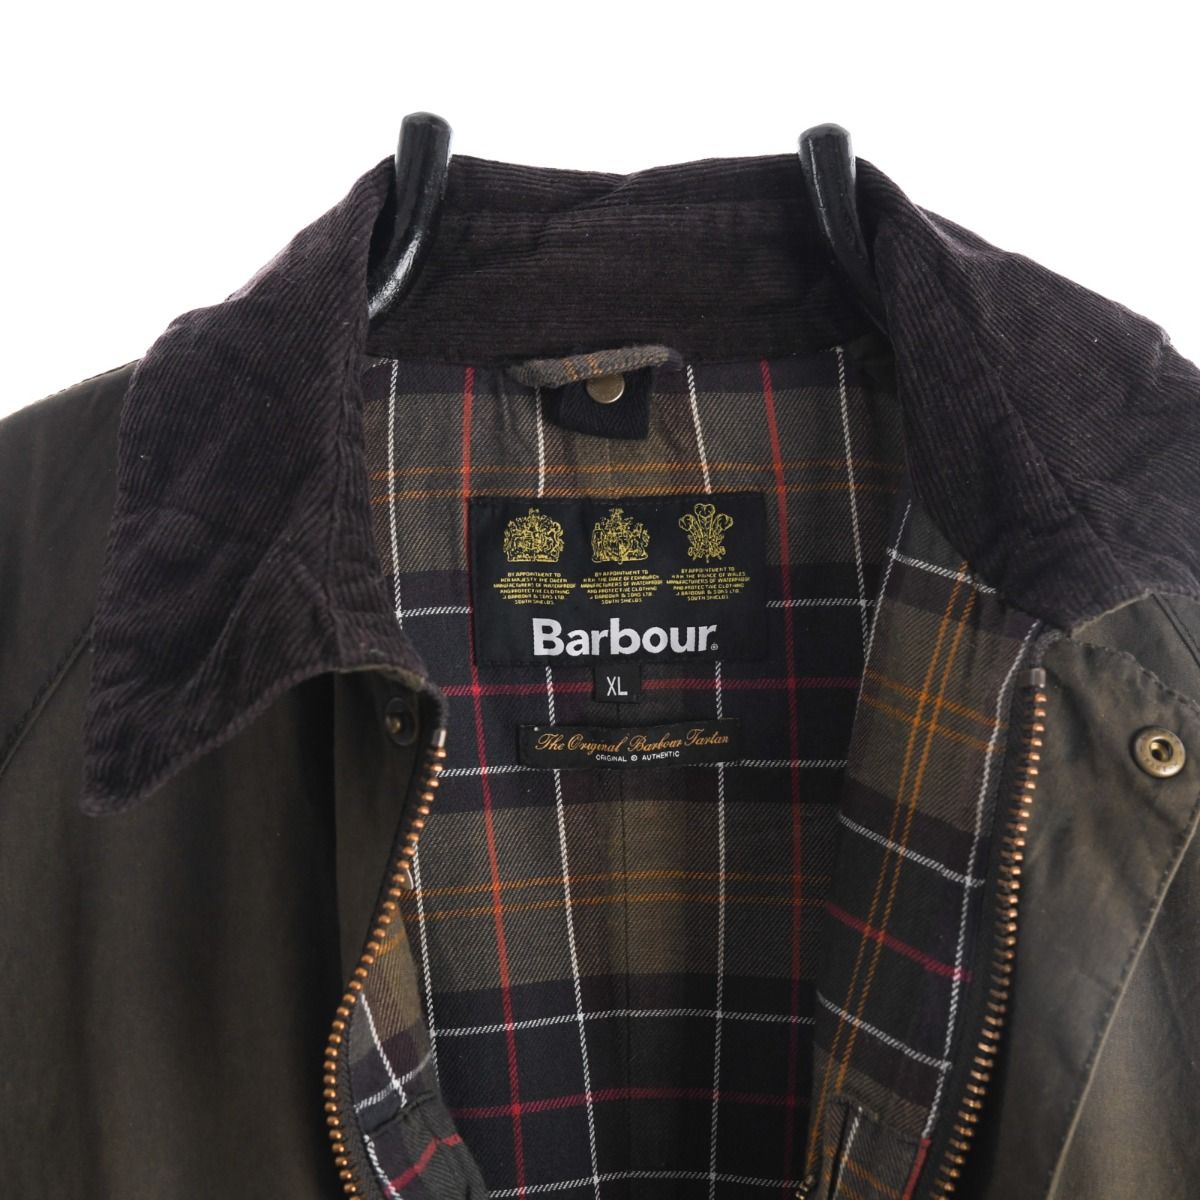 Barbour Ashby Wax Cotton Jacket